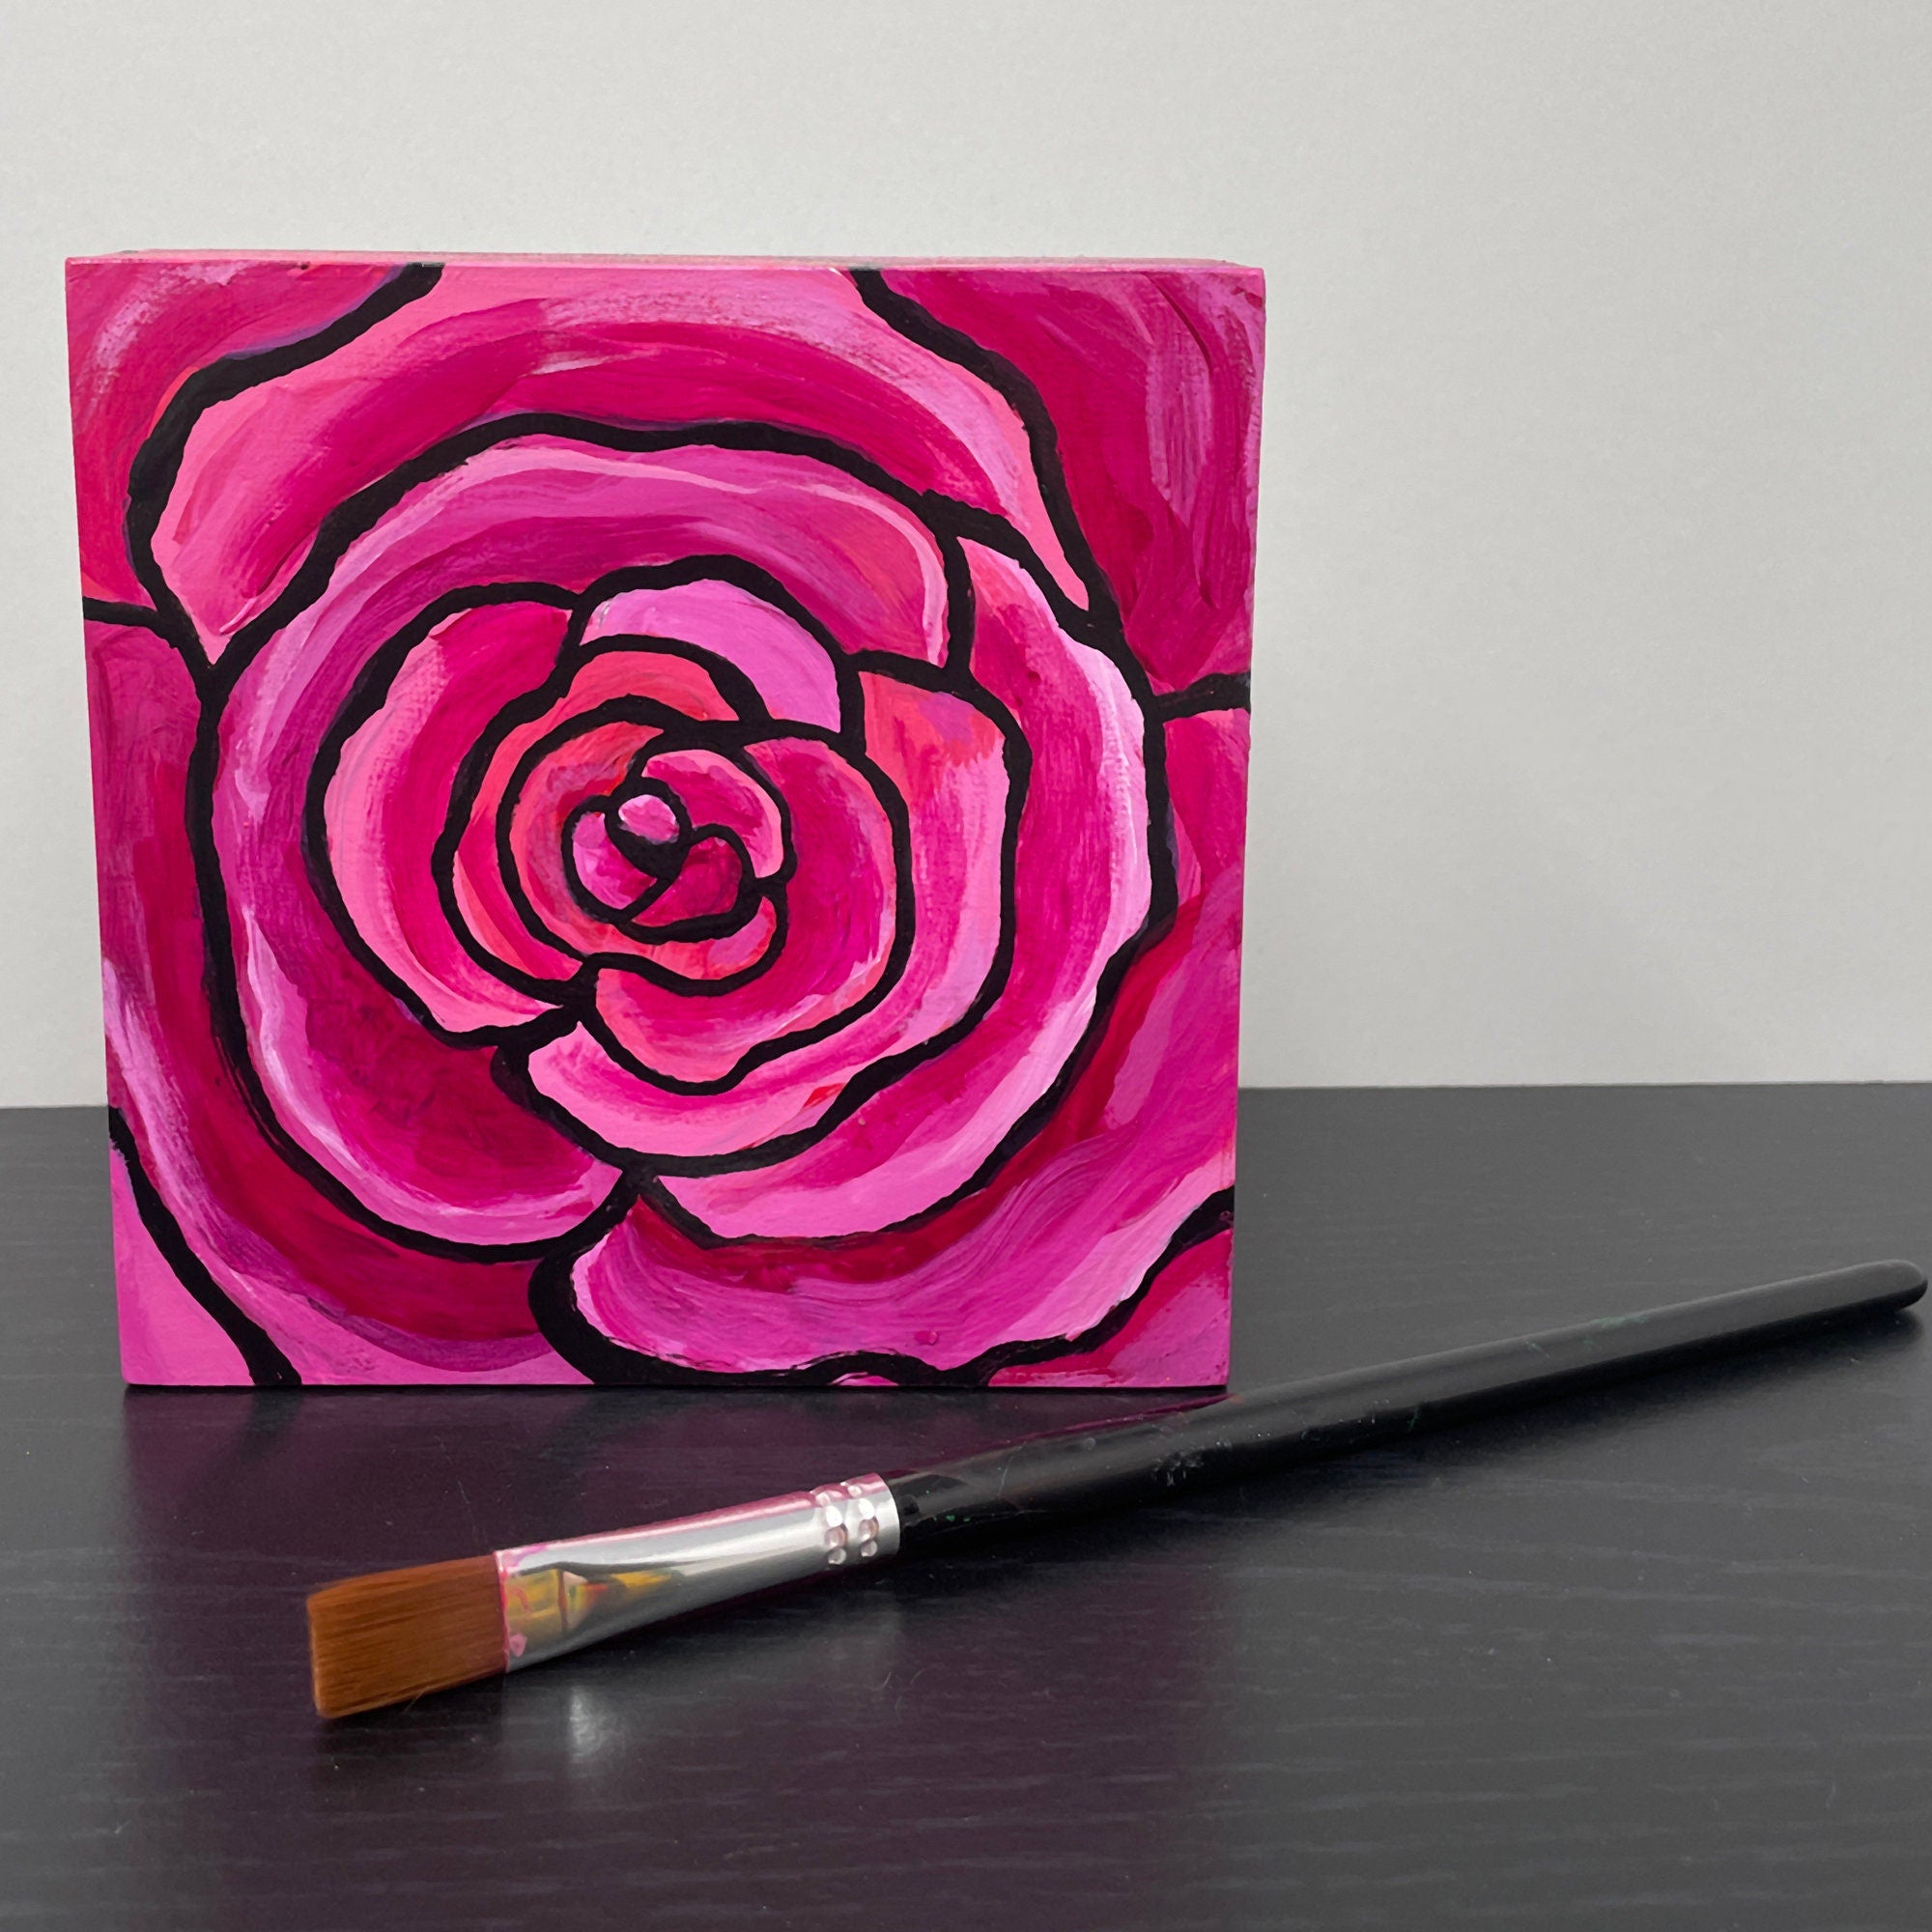 Pink Rose Painting - Original Acrylic Flower Art - Square 5x5 Inches - Cradled Wood Board - Ready to Hang